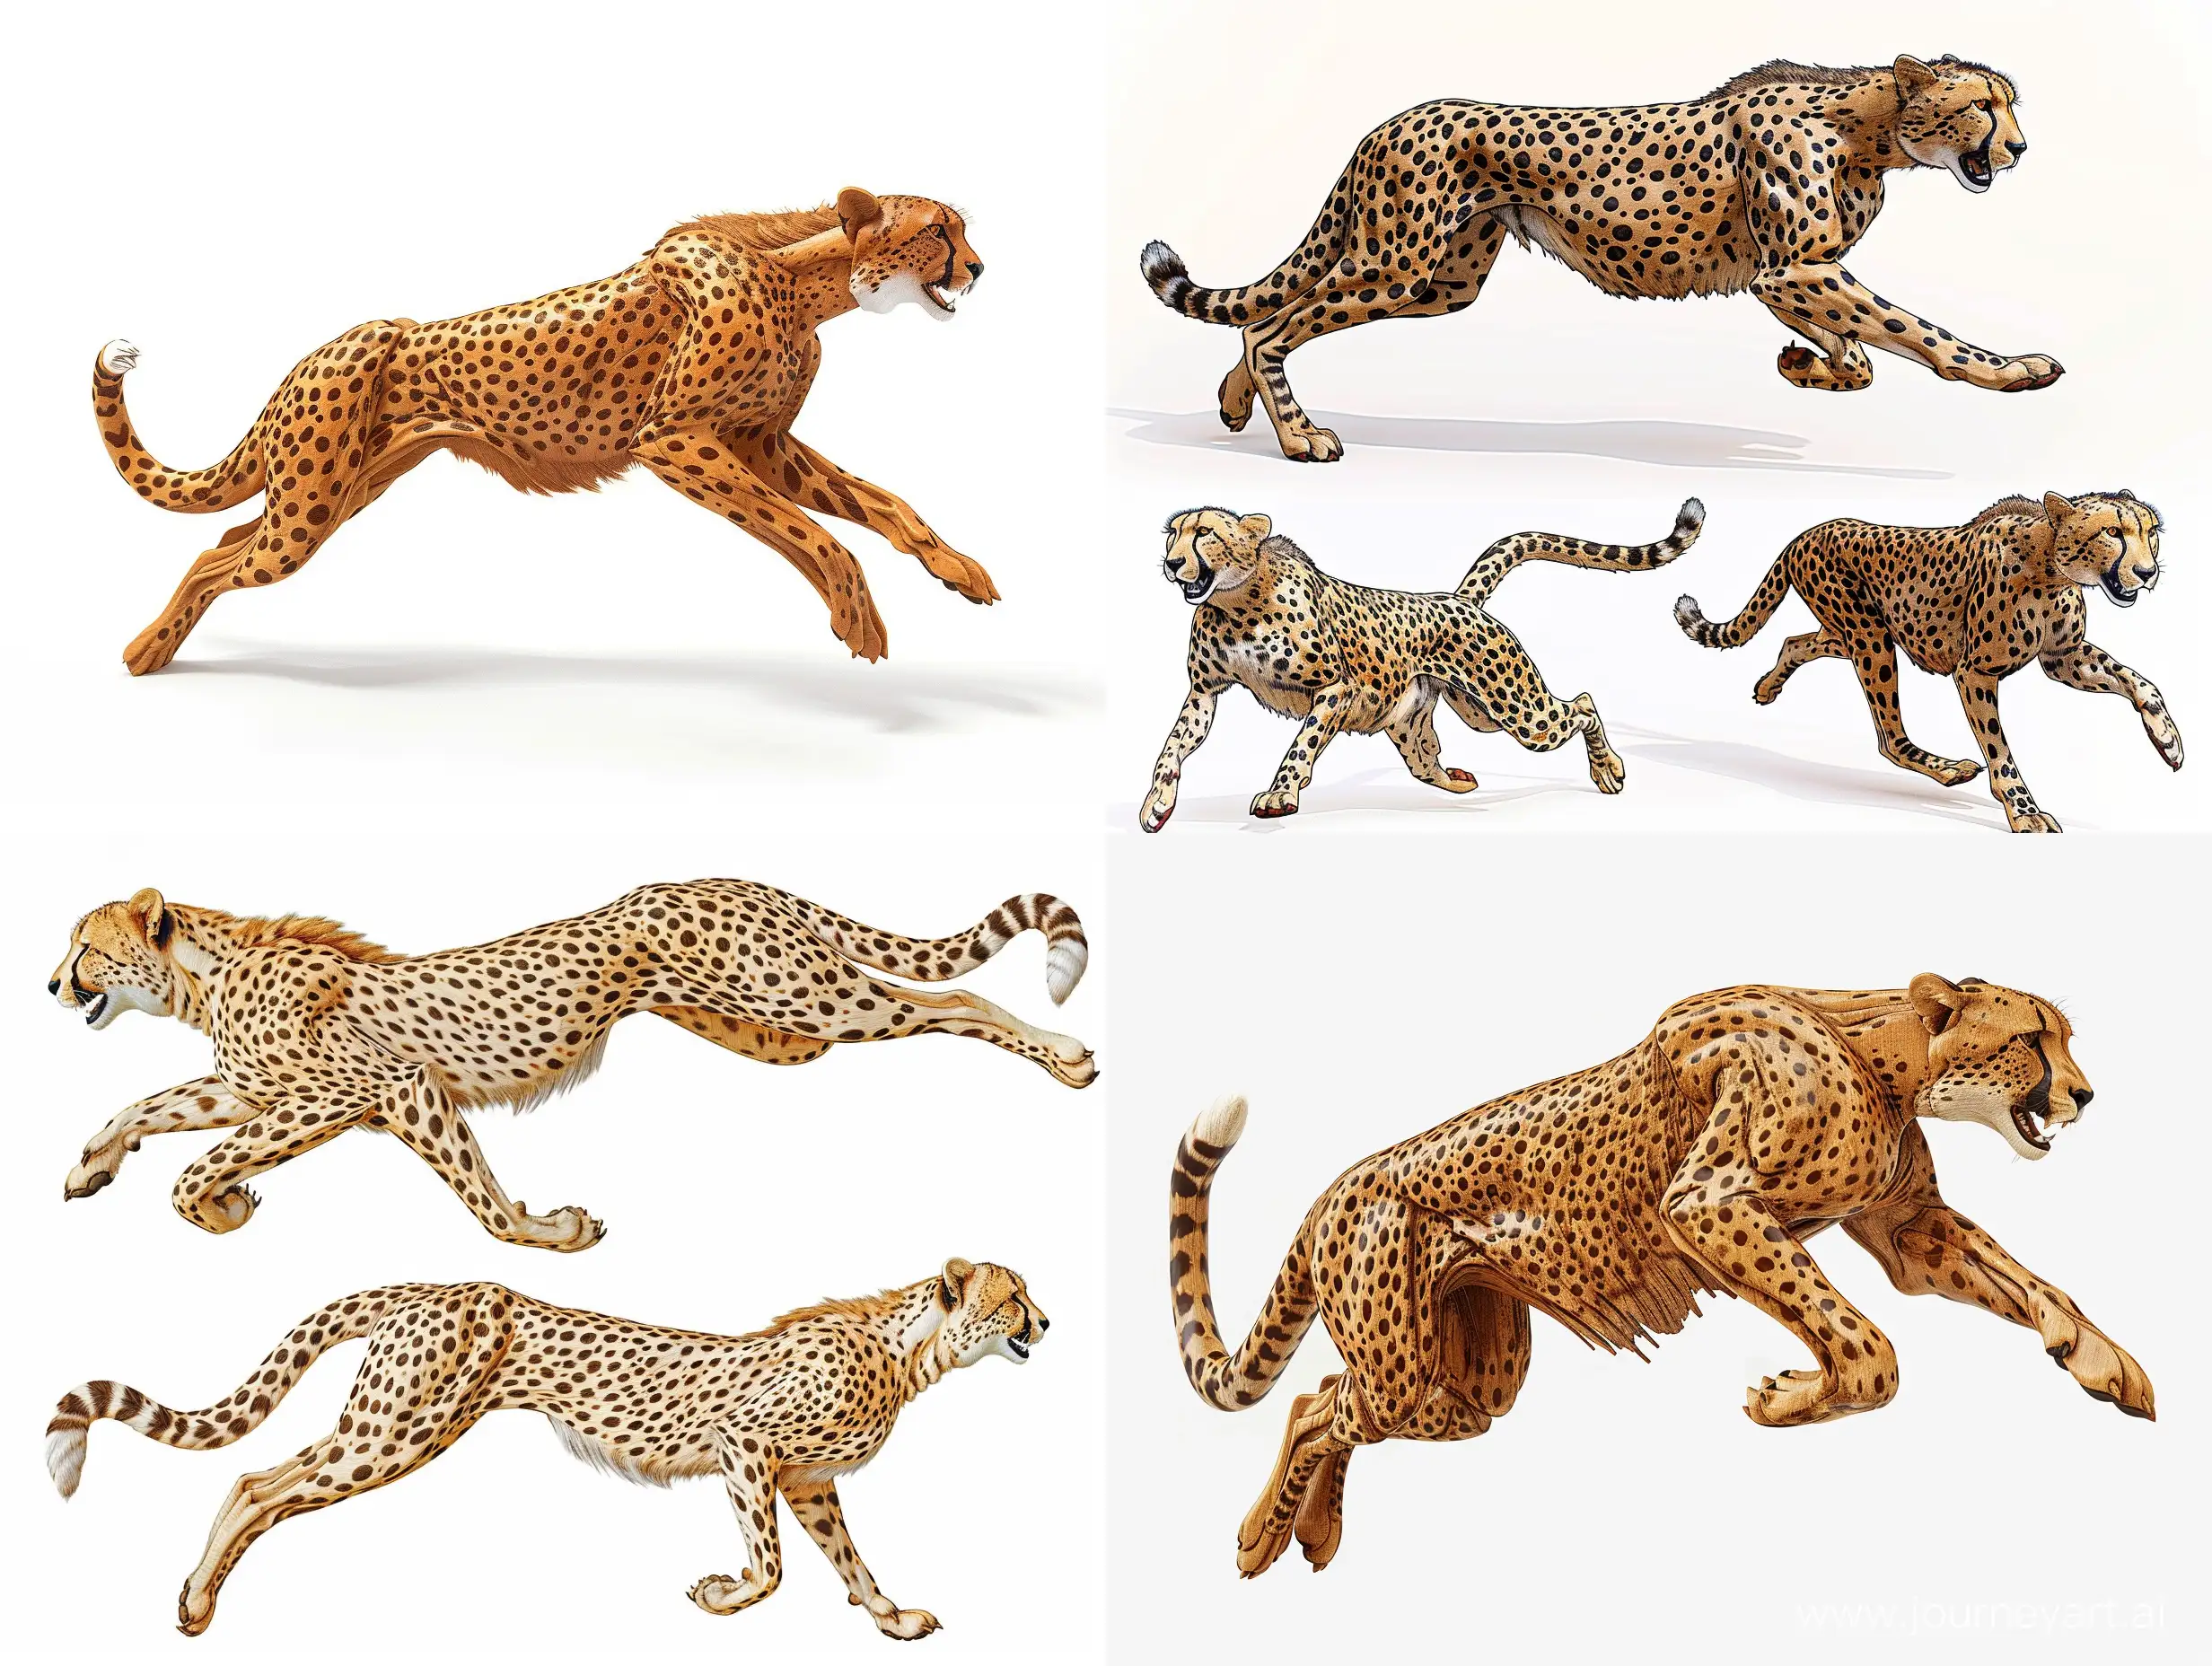 Dynamic-FullLength-Cheetah-Wooden-Sculpture-Profound-Realism-and-Movement